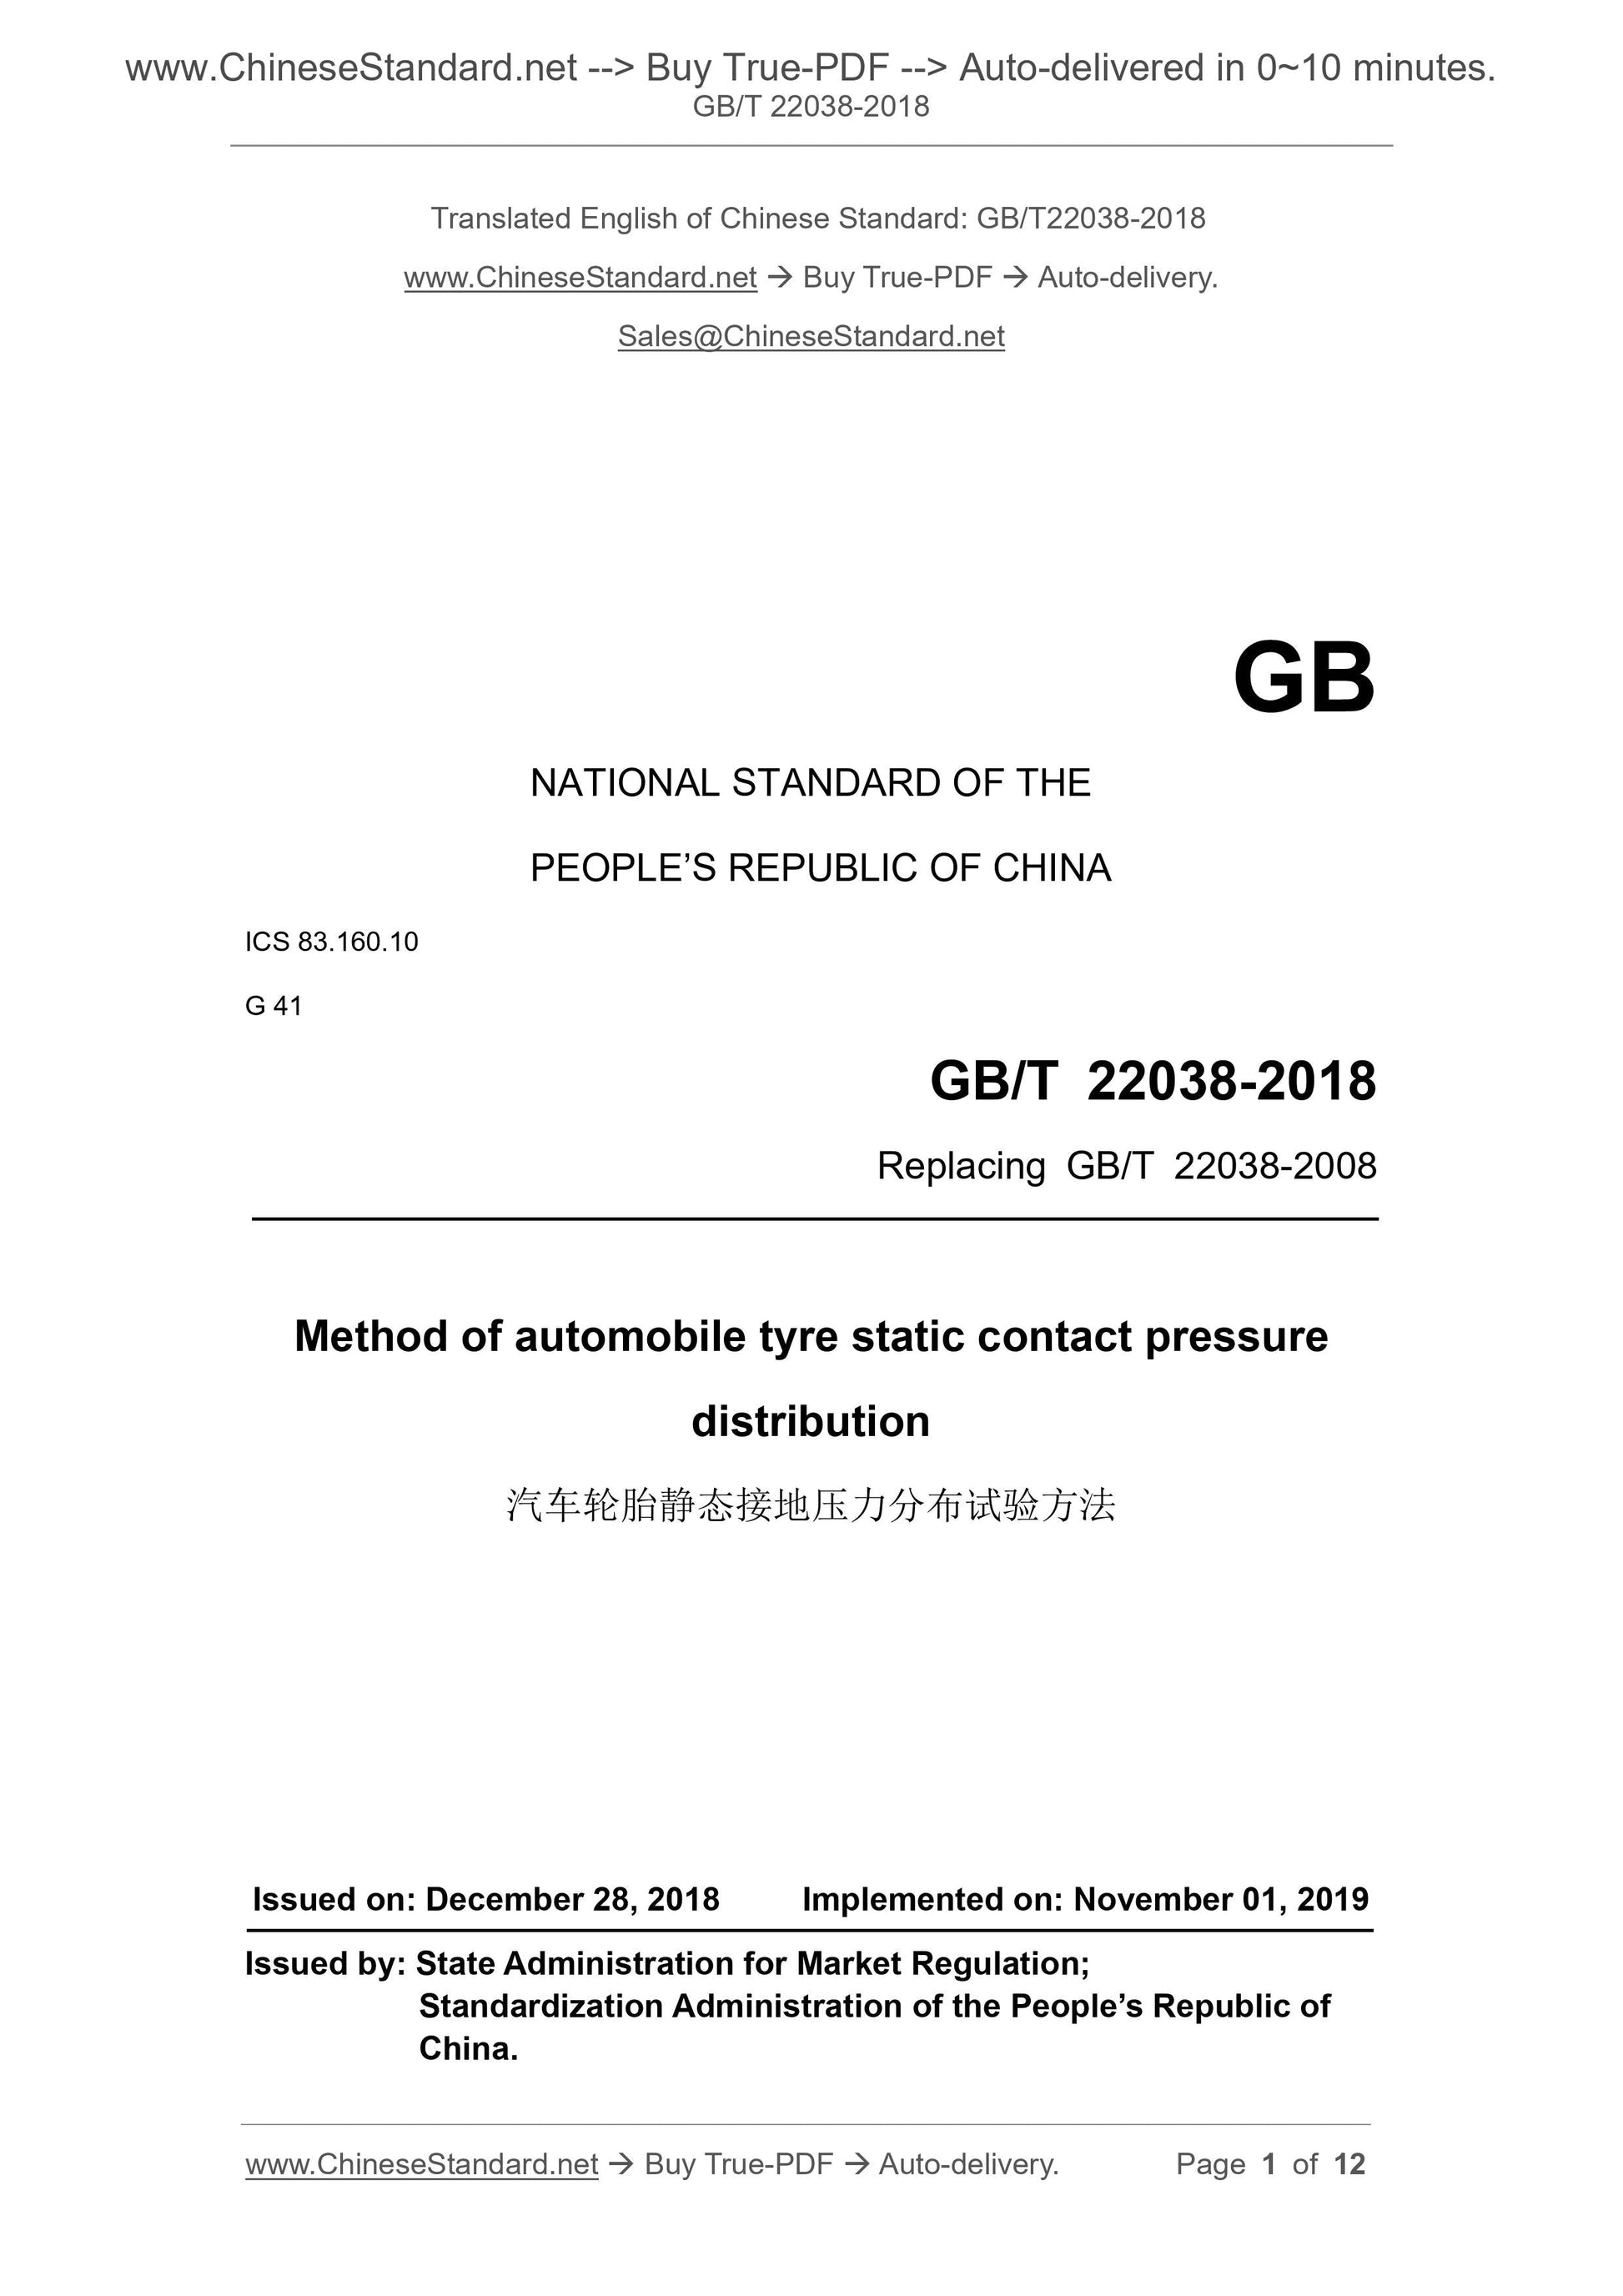 GB/T 22038-2018 Page 1